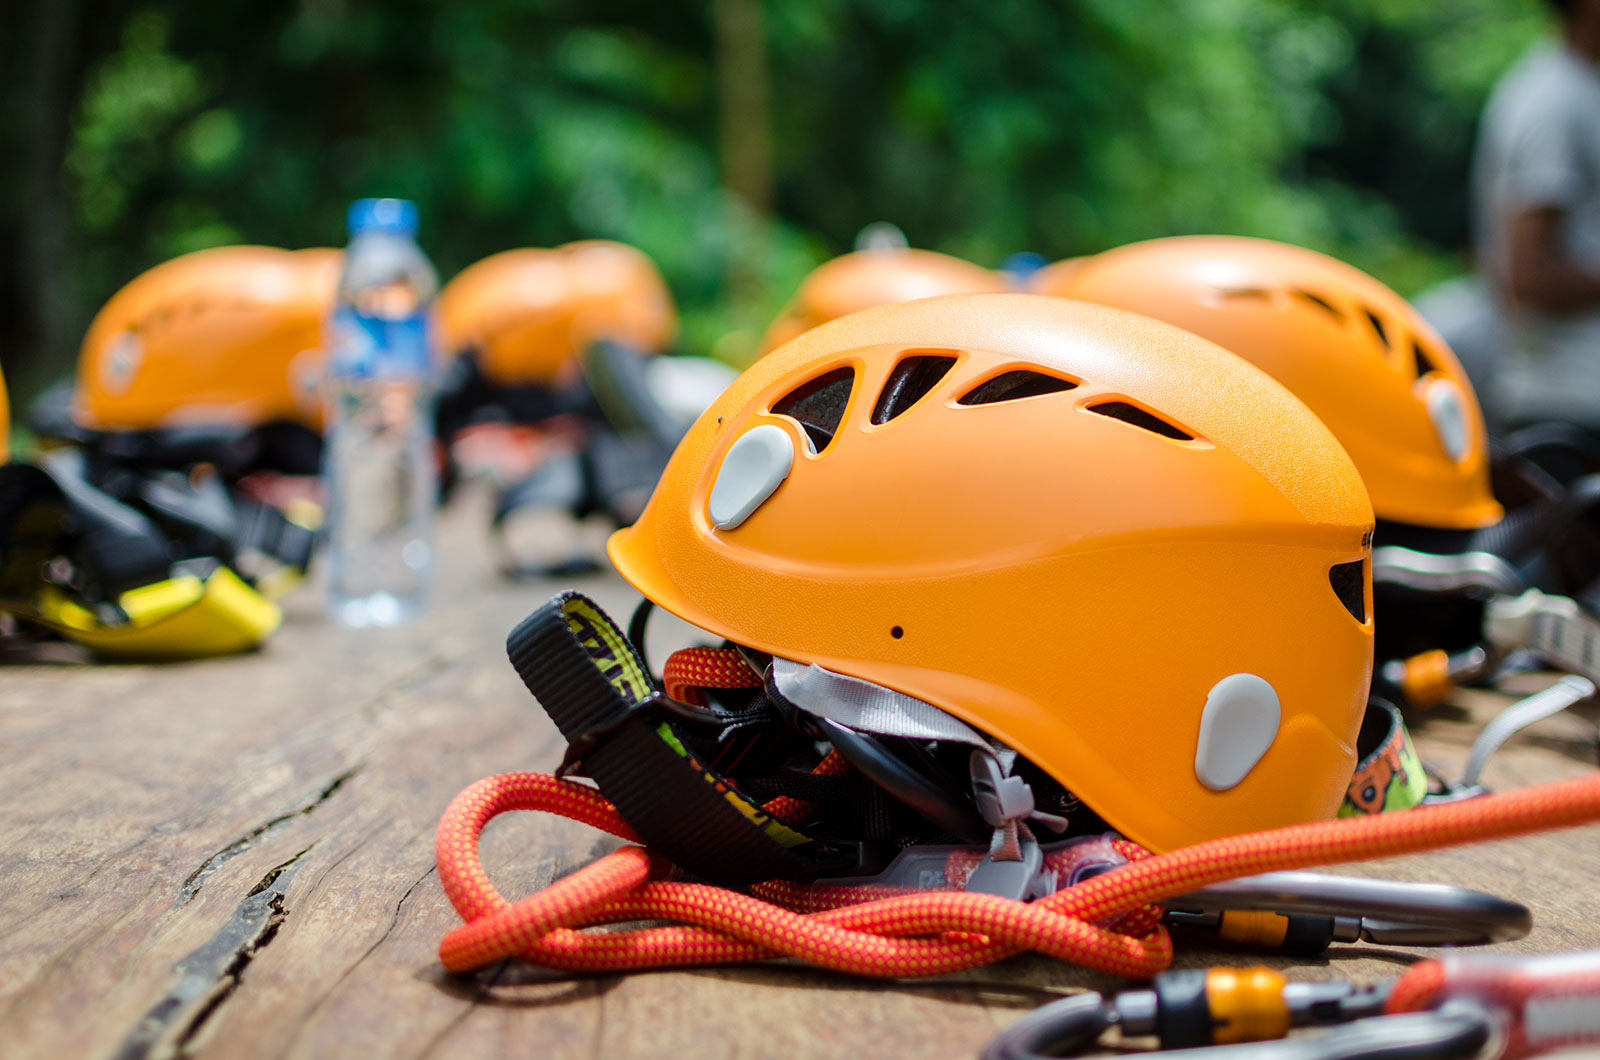 What Equipment is Used for Zip Lining?